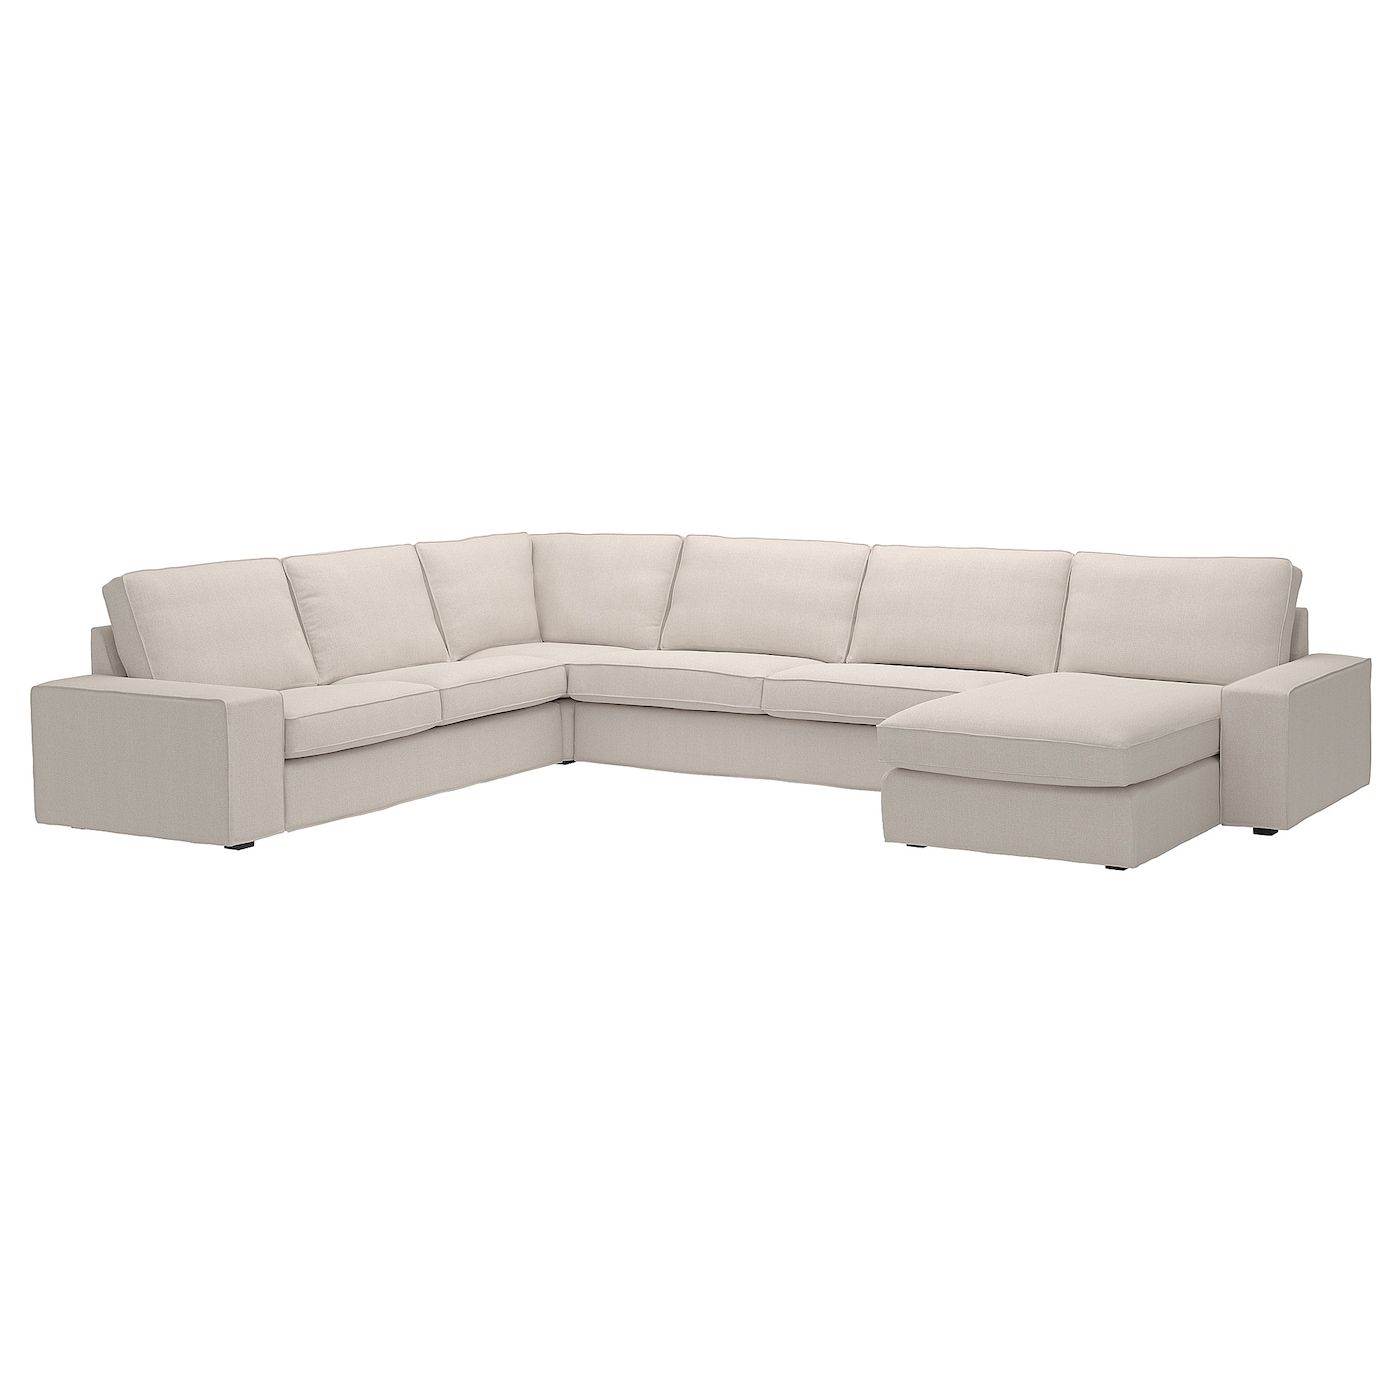 Kivik Sectional 6 Seat Crn/chaise, Tresund Light Beige – Ikea For 6 Seater Sectional Couches (View 19 of 20)